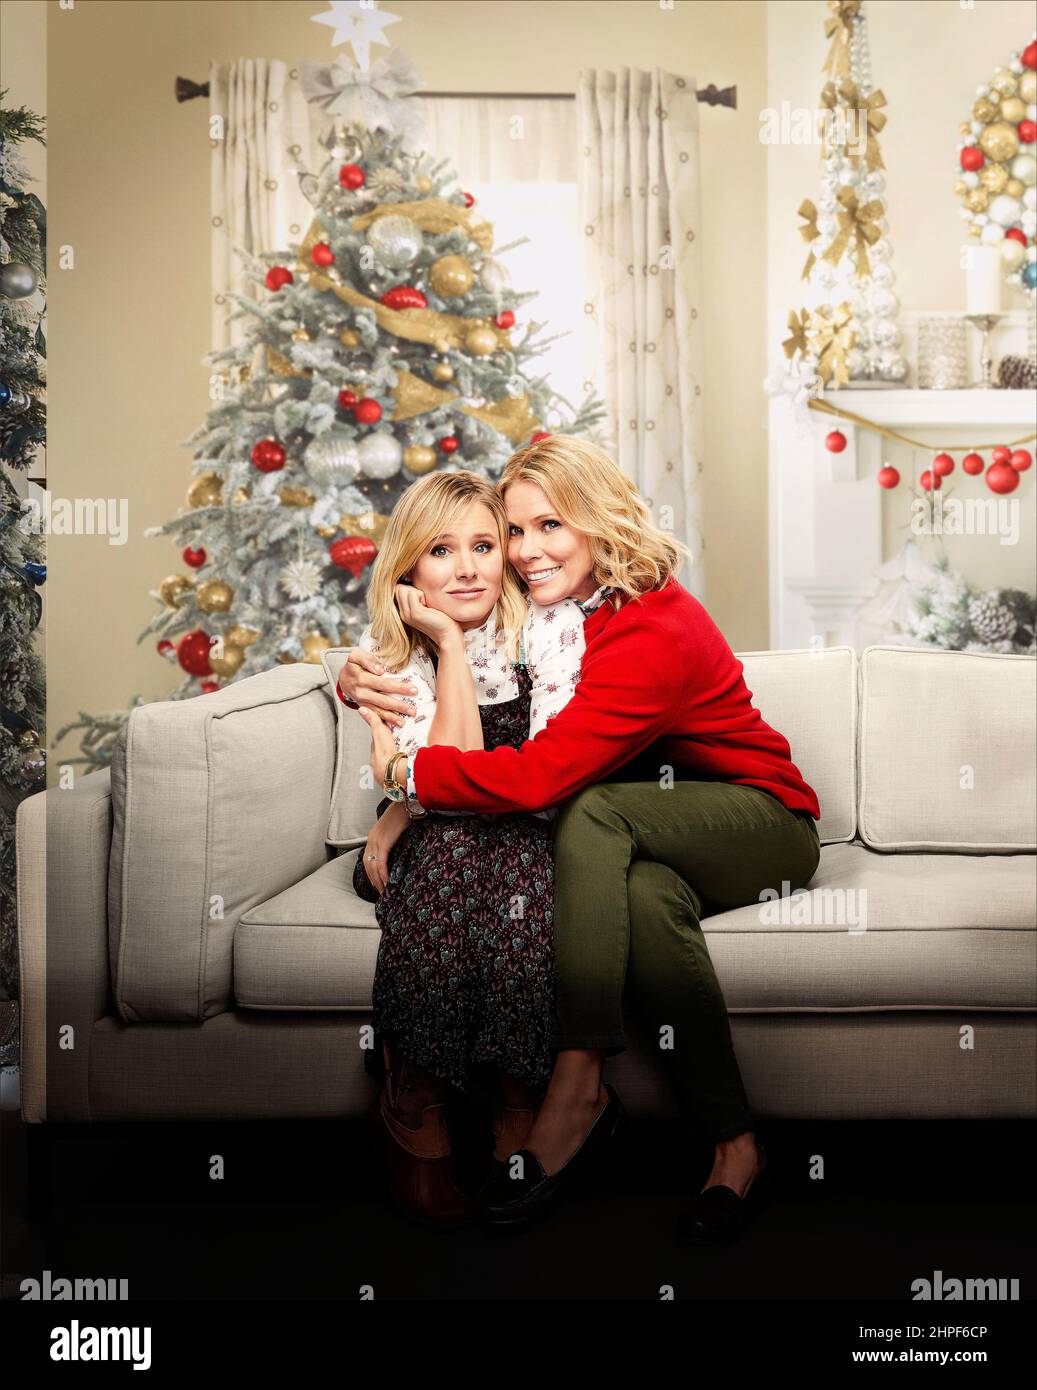 KRISTEN BELL and CHERYL HINES in A BAD MOMS CHRISTMAS (2017), directed by JON LUCAS and SCOTT MOORE. Credit: Huayi Brothers Media/STX Entertainment / Album Stock Photo